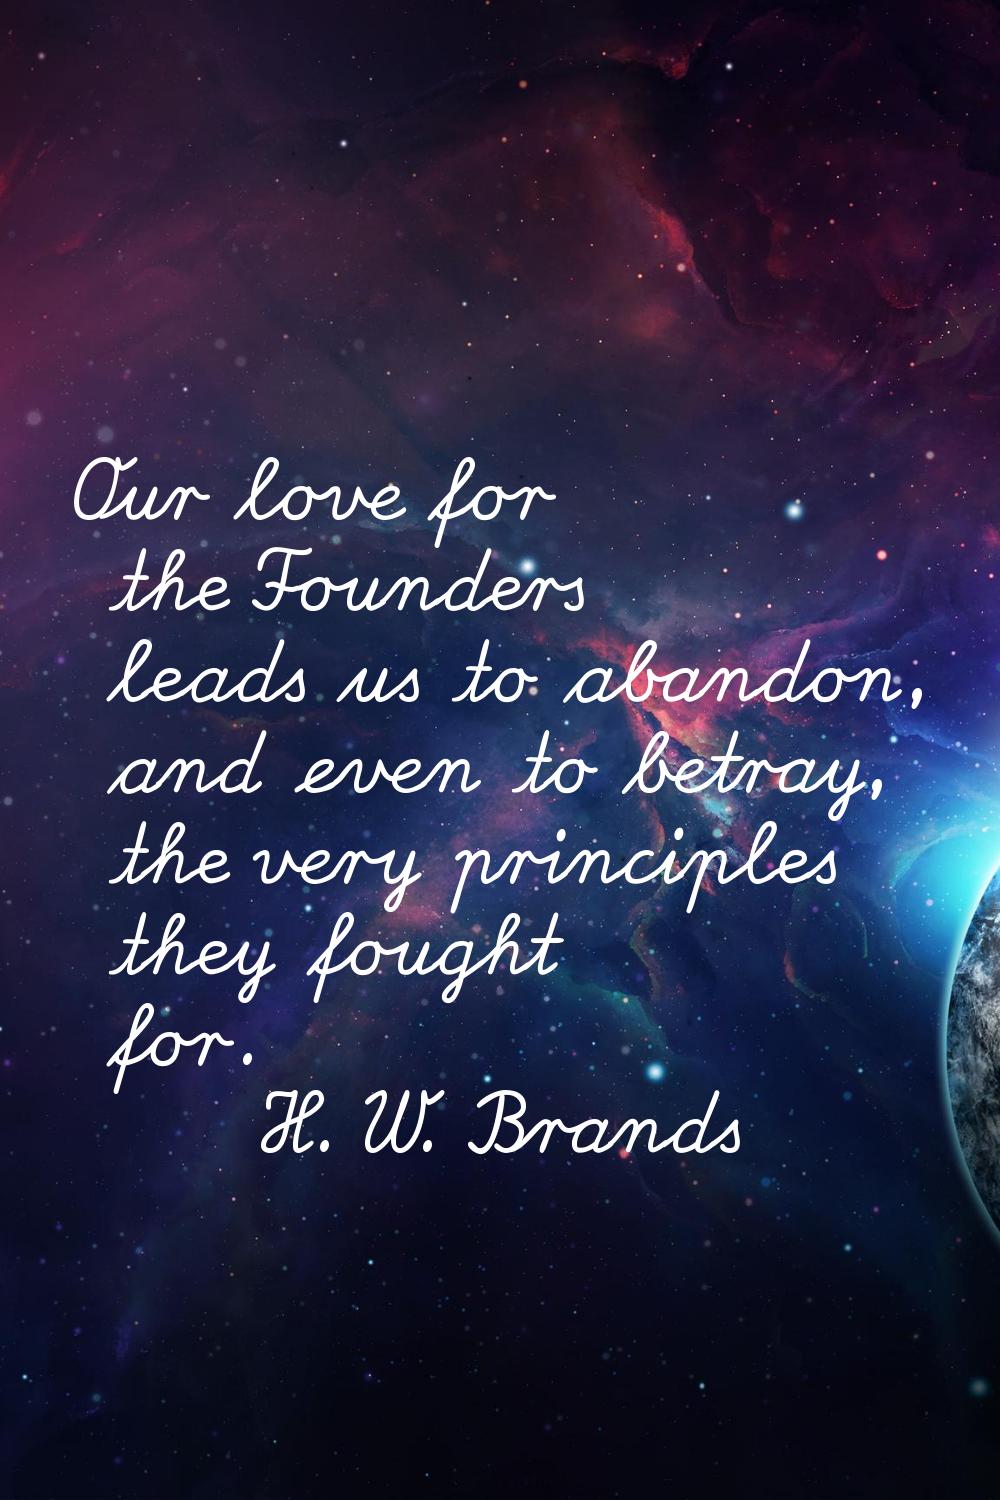 Our love for the Founders leads us to abandon, and even to betray, the very principles they fought 